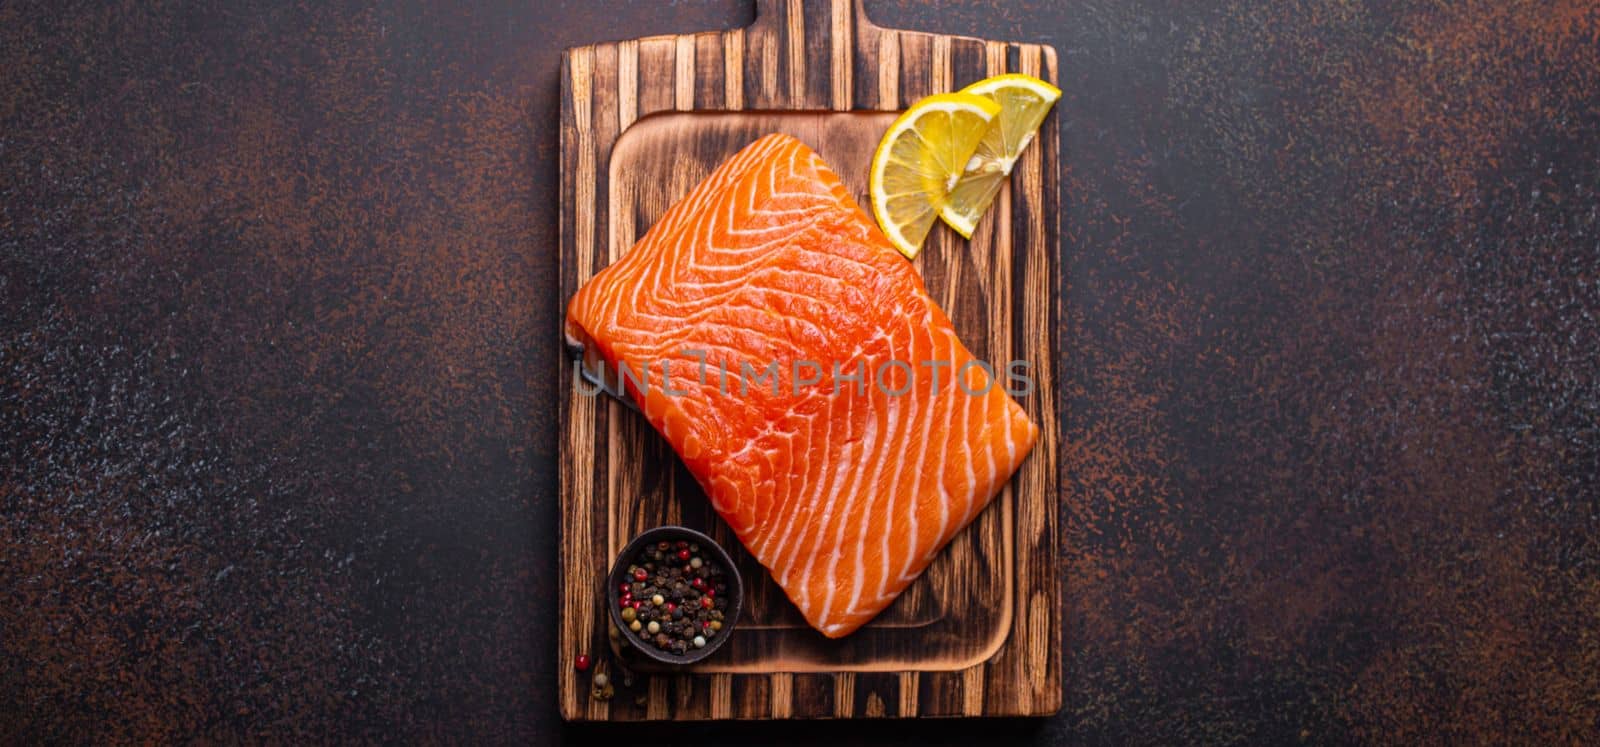 Fresh raw salmon fillet on wooden kitchen cutting board with seasonings and lemon top view on dark brown rustic background